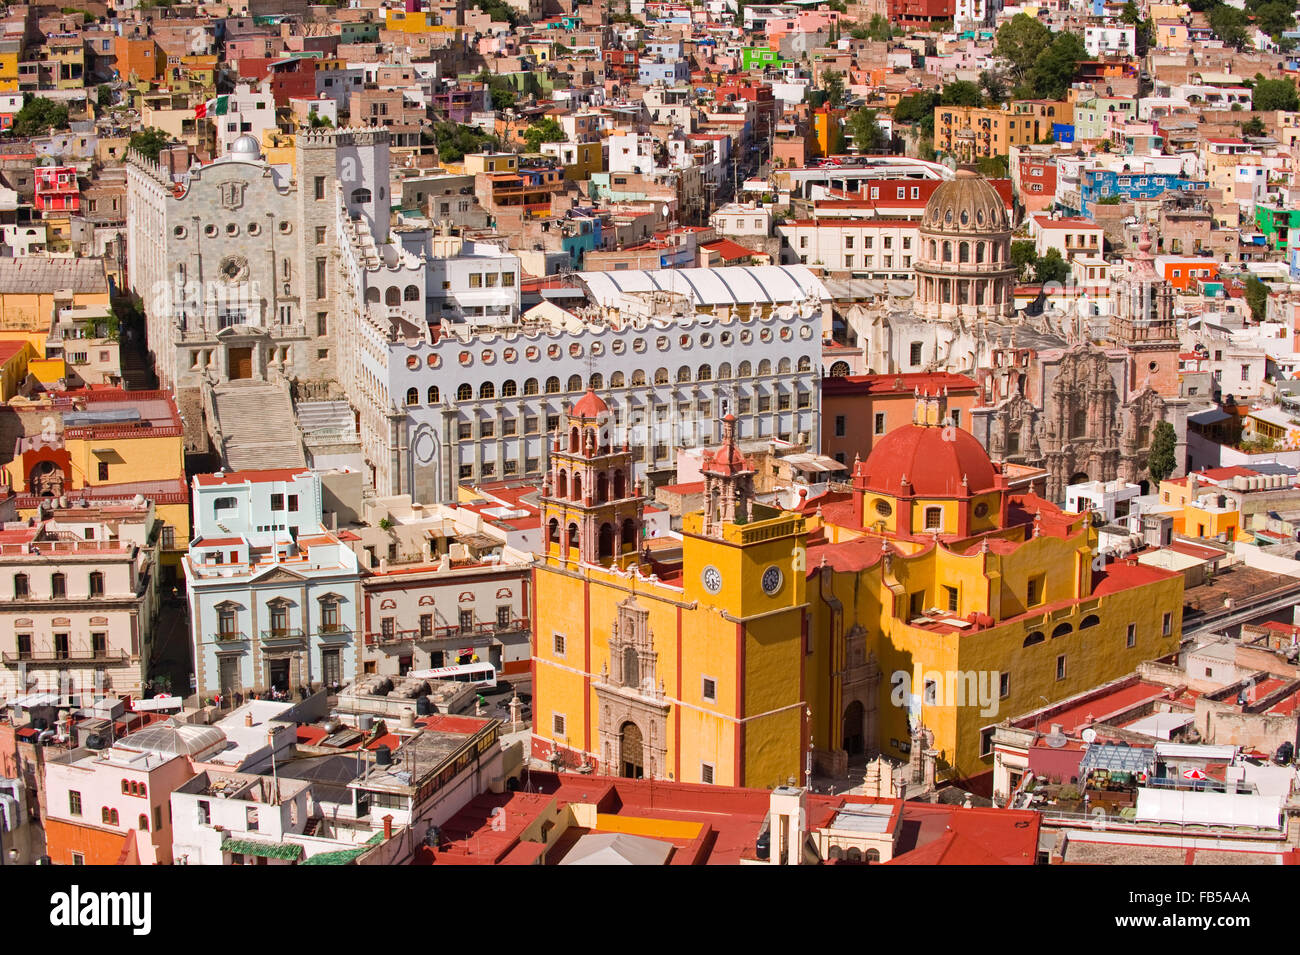 The University and cathedral set among the colourful houses of the UNESCO World Heritage Site city of Guanajuato, Mexico Stock Photo